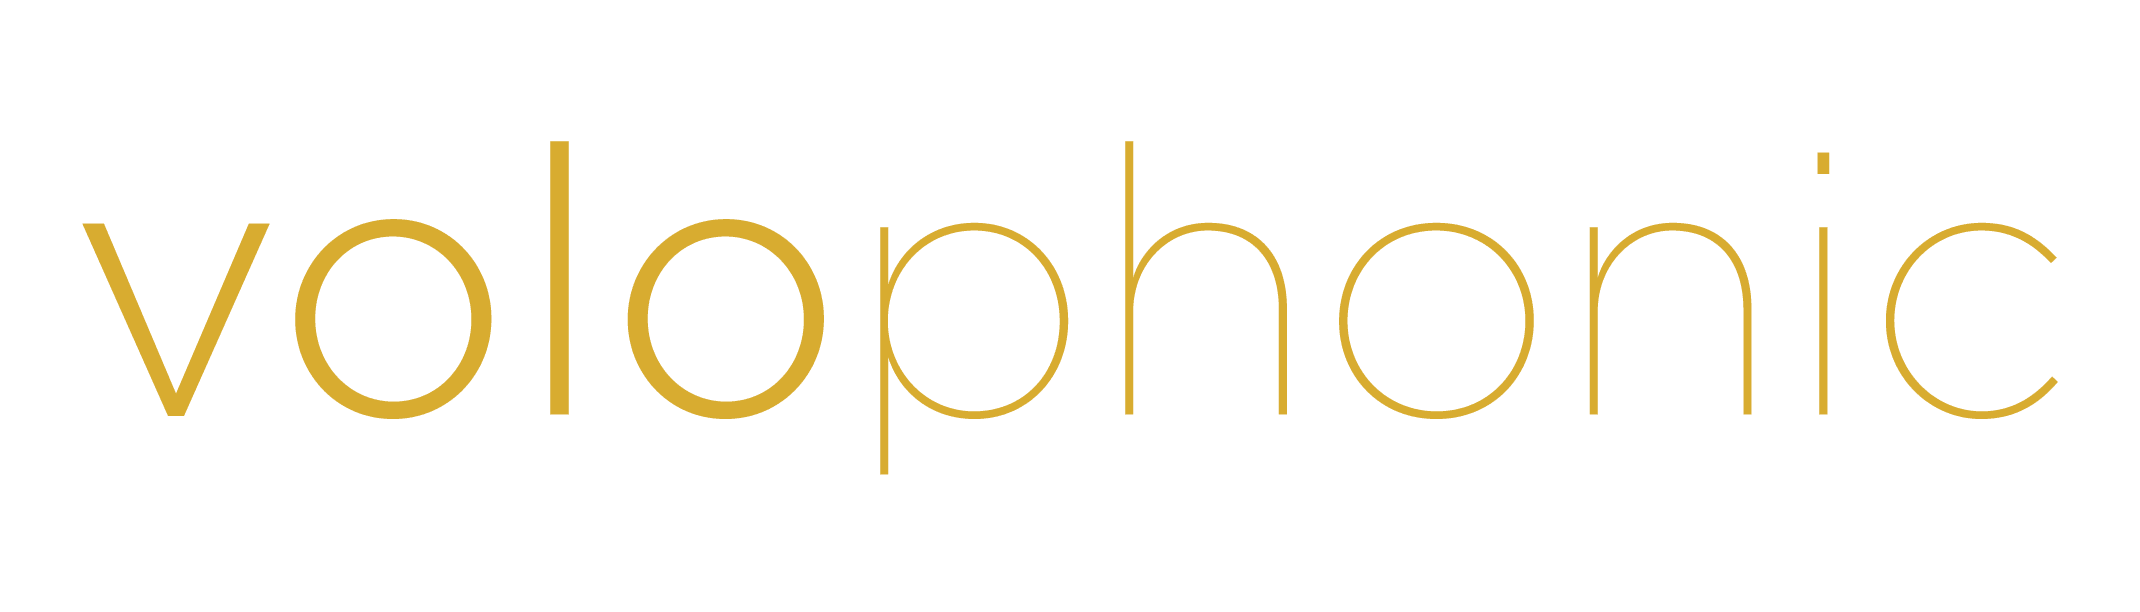 Volophonic - Volophonic is a bespoke music and sound agency delivering high-end audio solutions for media and film.  We specialise in tailor made compositions, song-writing and sound design.